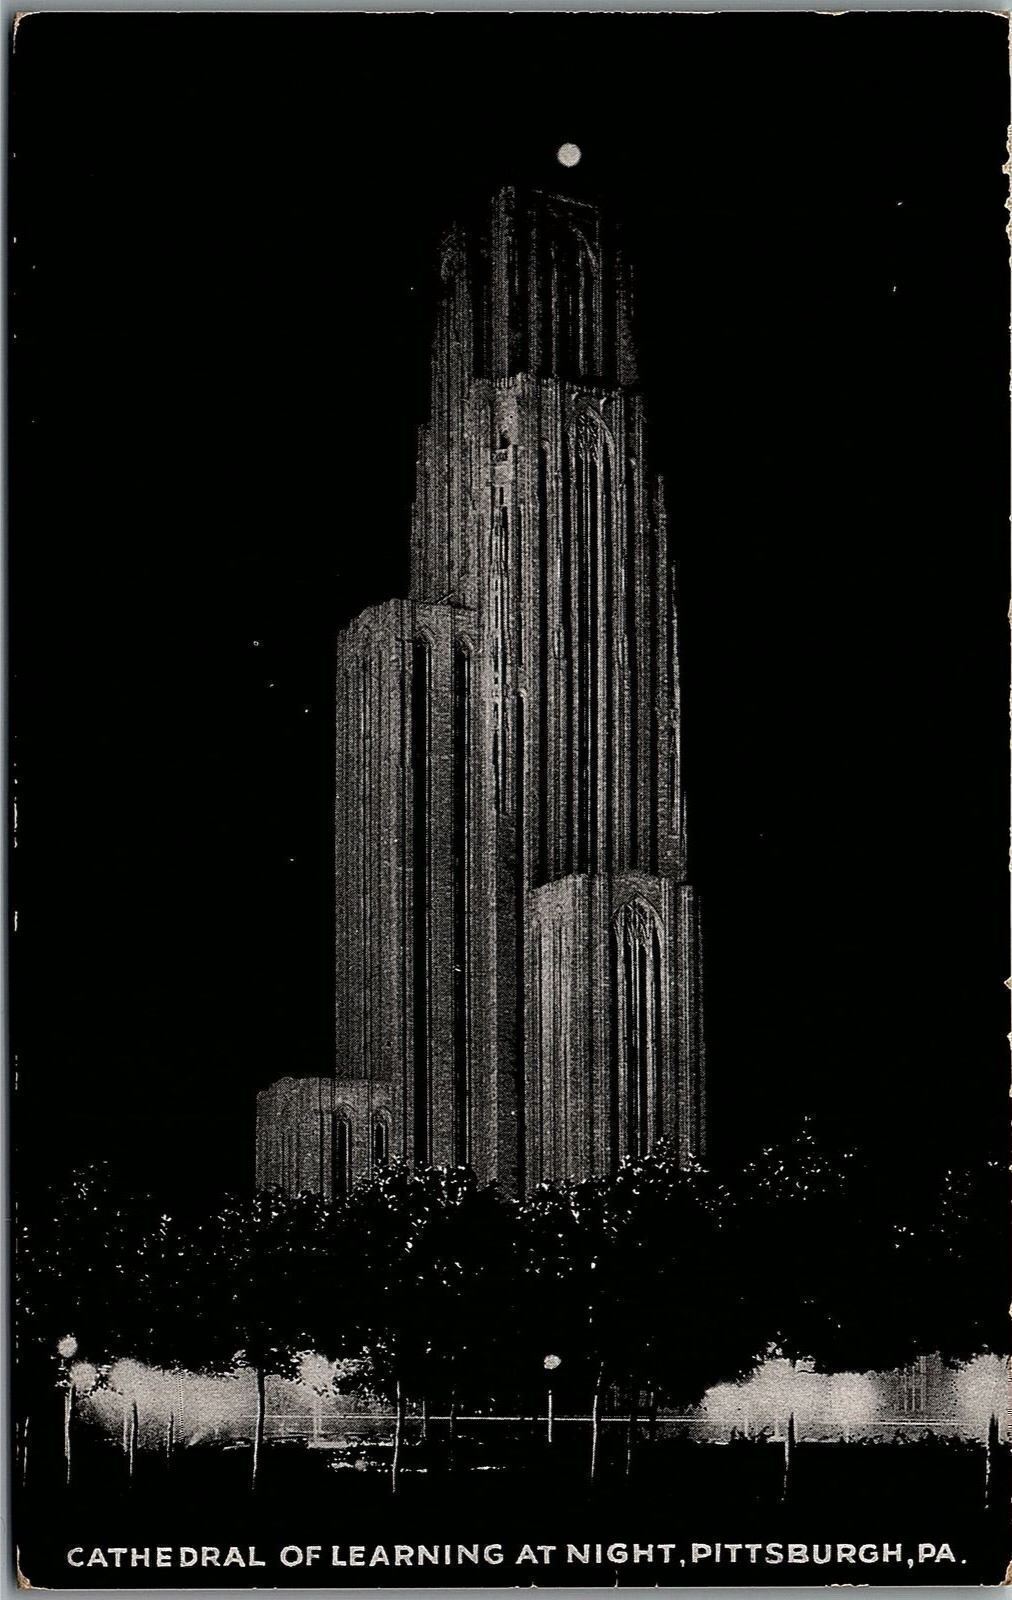 1933 PITTSBURGH PA CATHEDRAL OF LEARNING UNIV OF PITTSBURGH POSTCARD 26-117